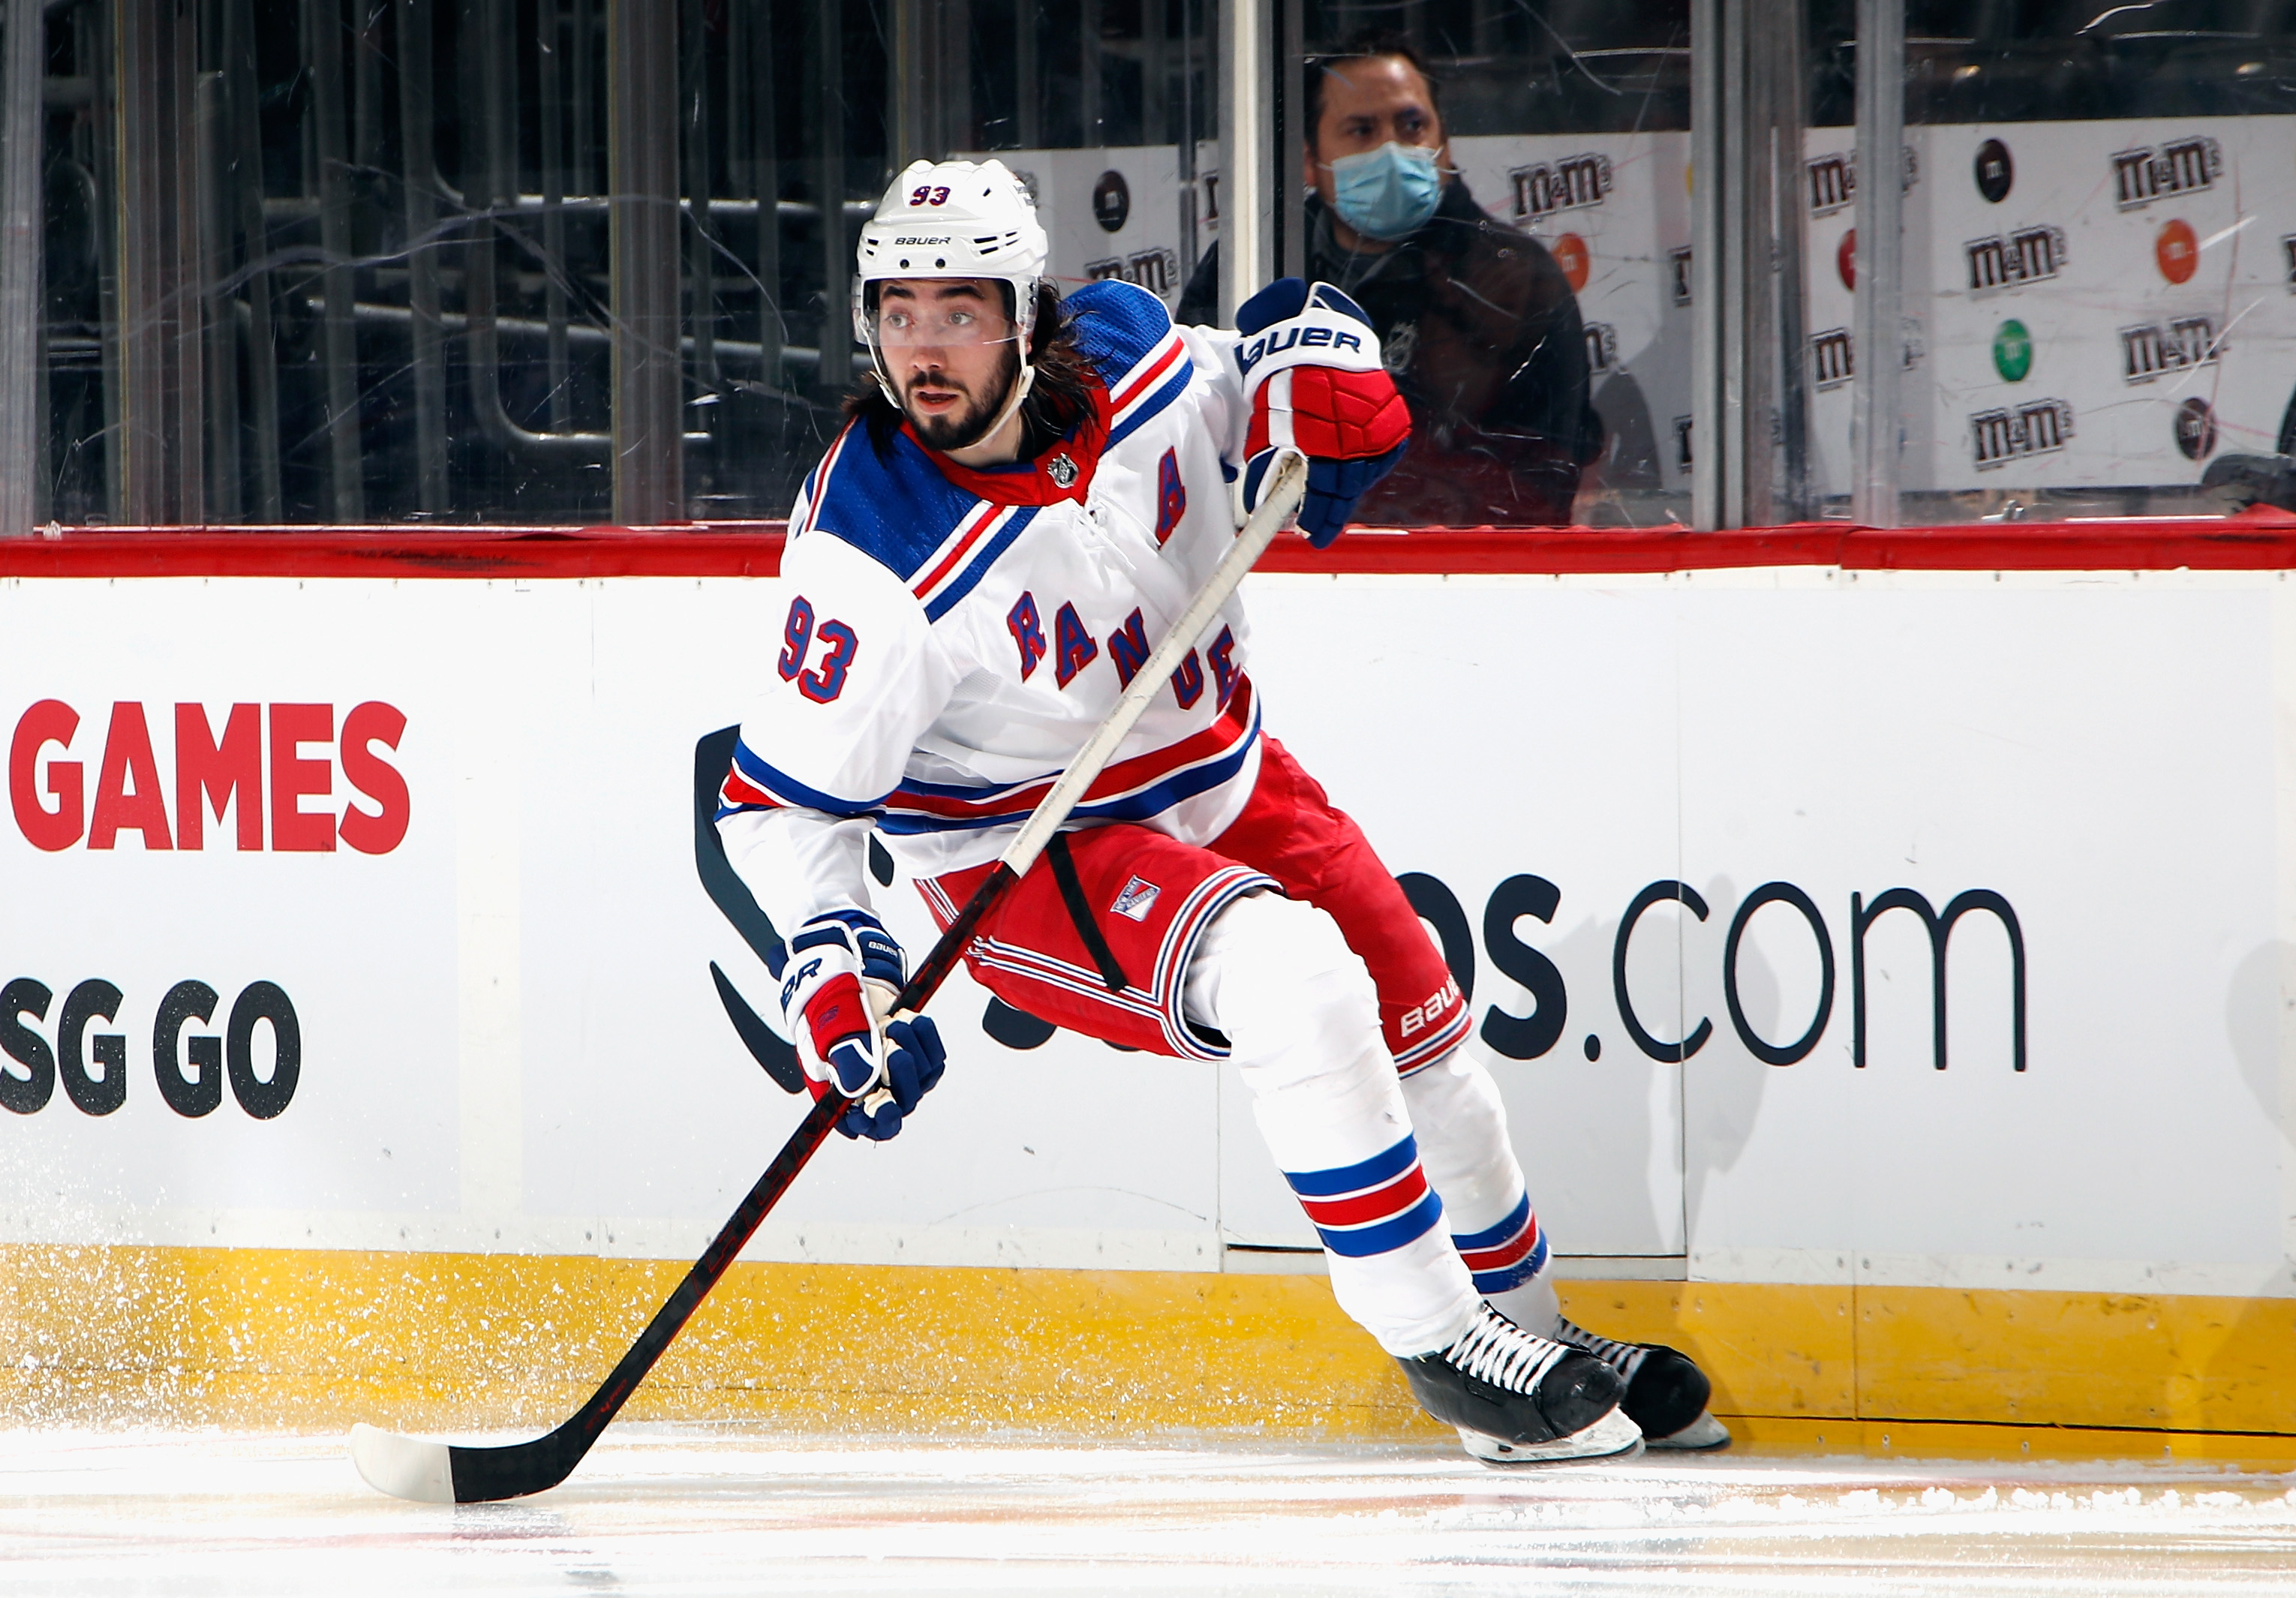 Rangers agree to terms with Mika Zibanejad on 8 year extension